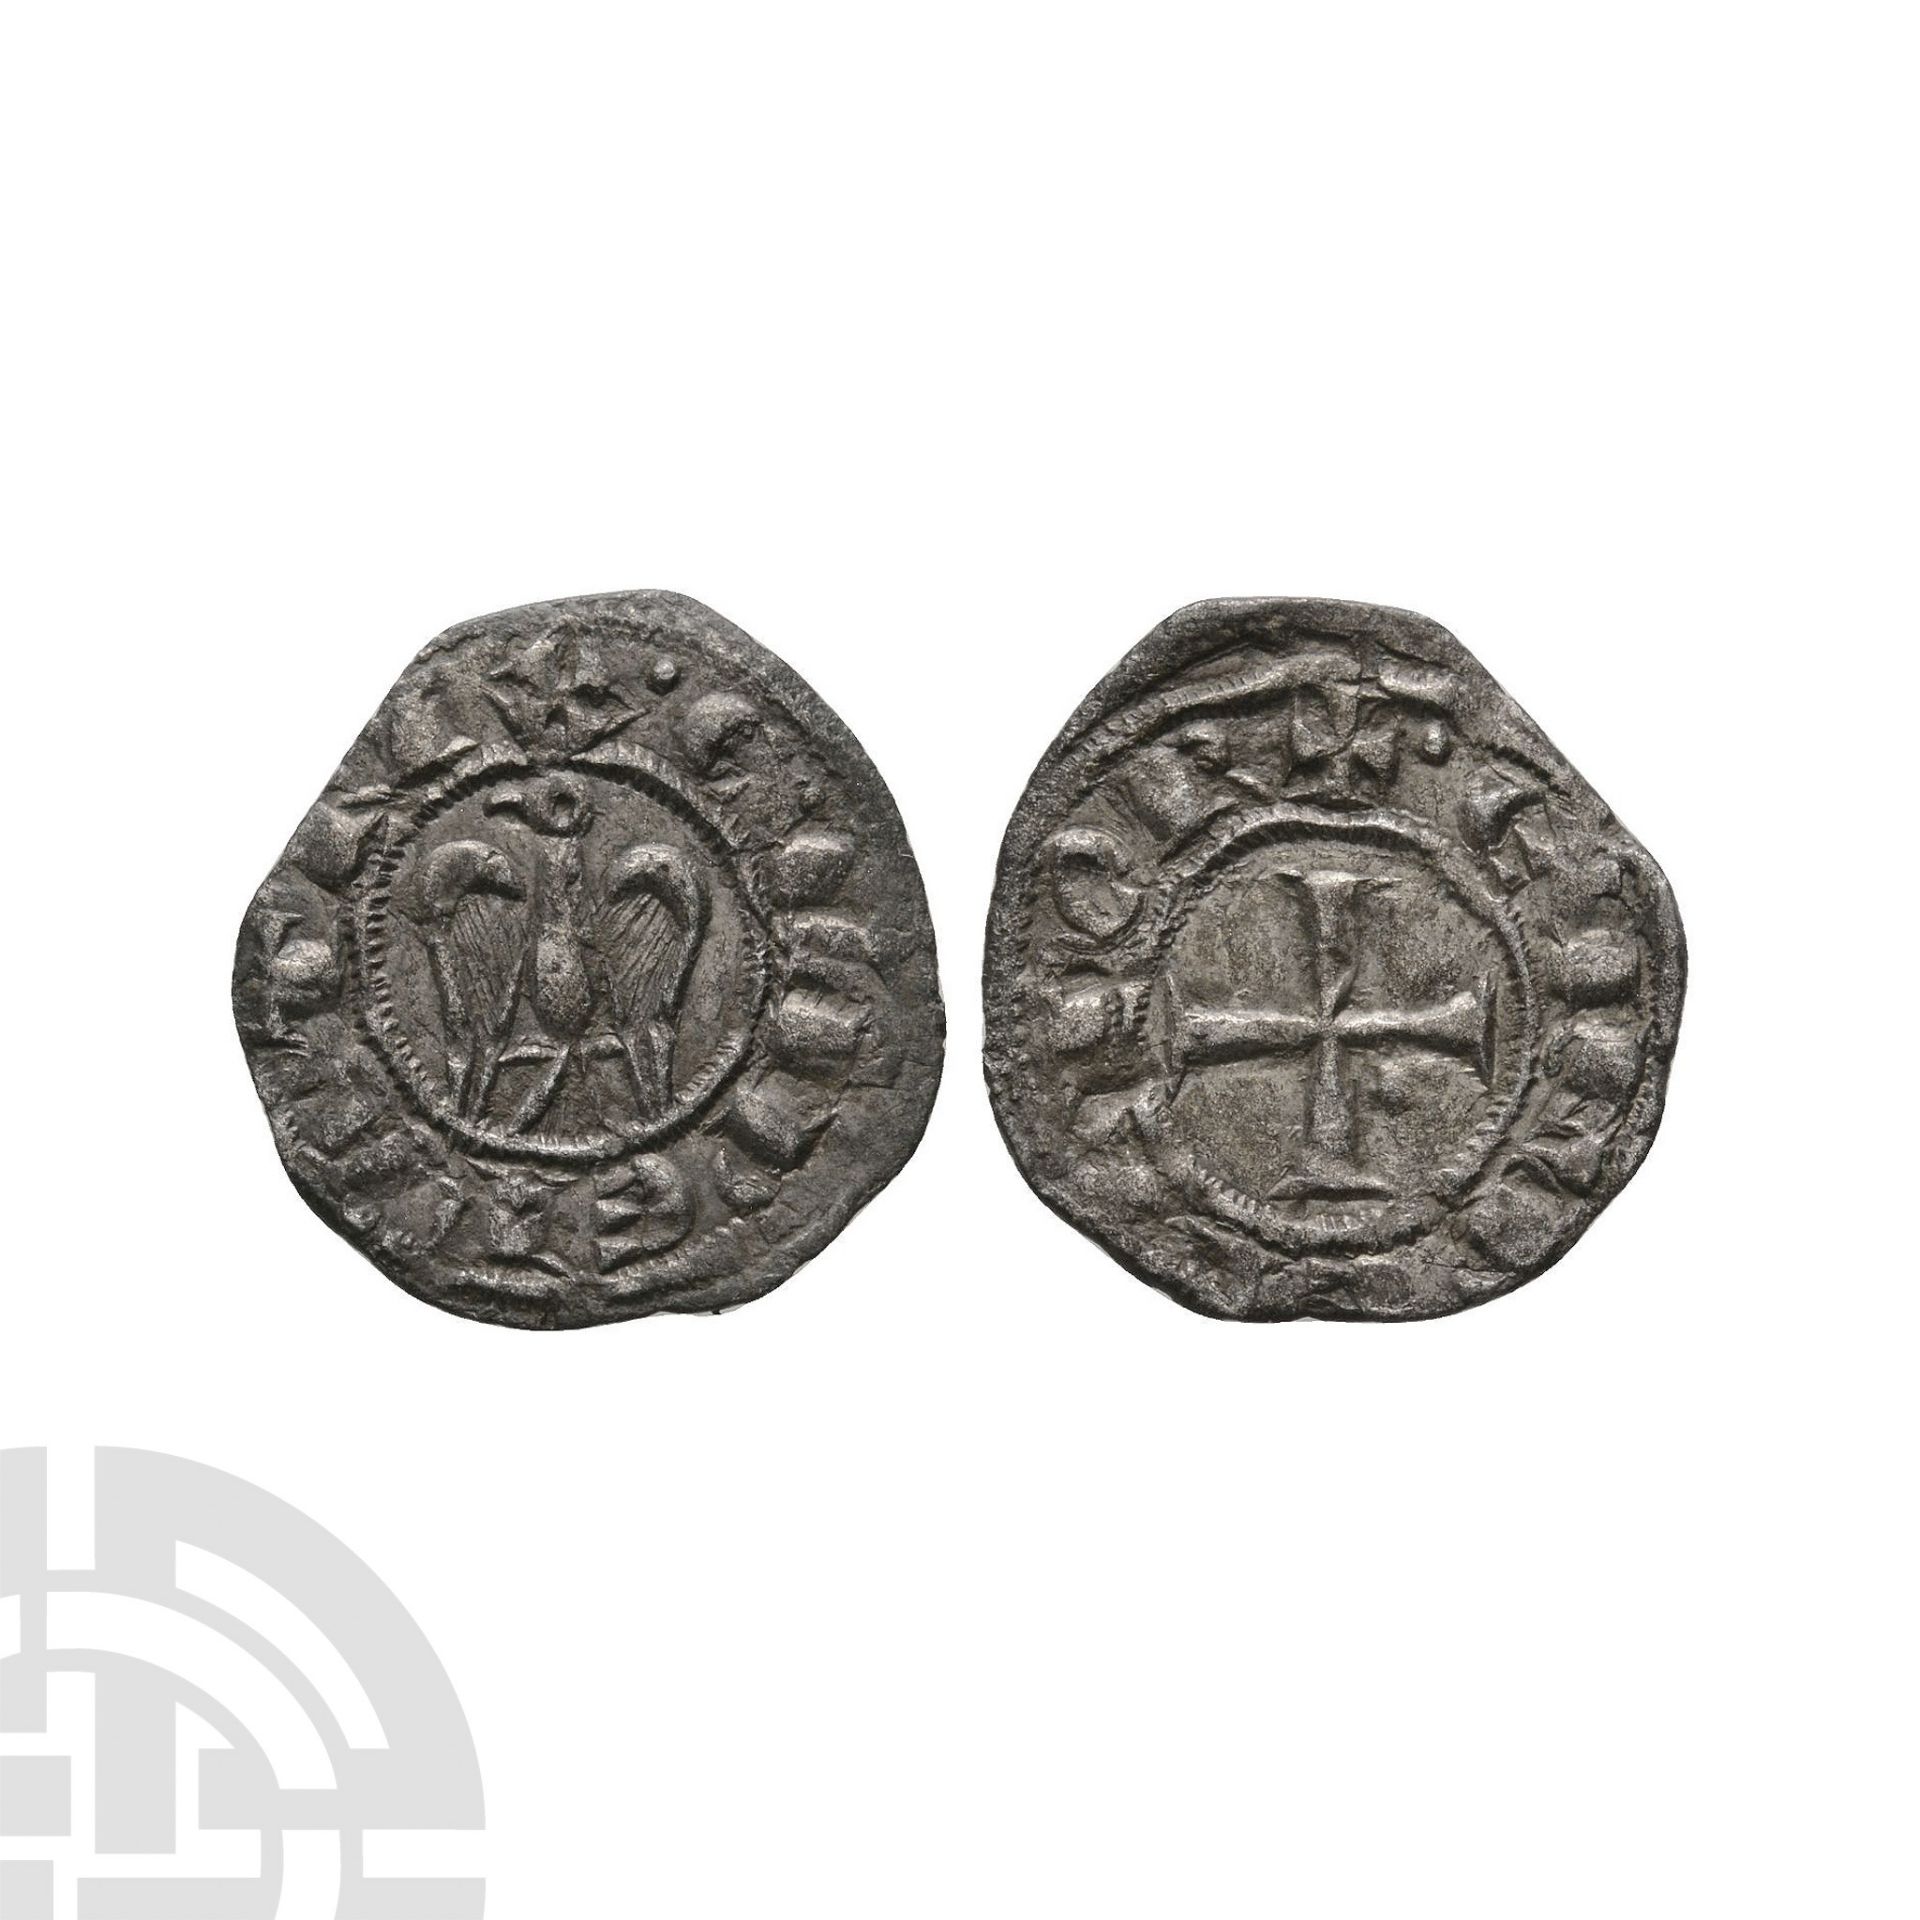 World Coins - Crusader Issues - Republic of Italy - Constance & Henry VI - AR Denier